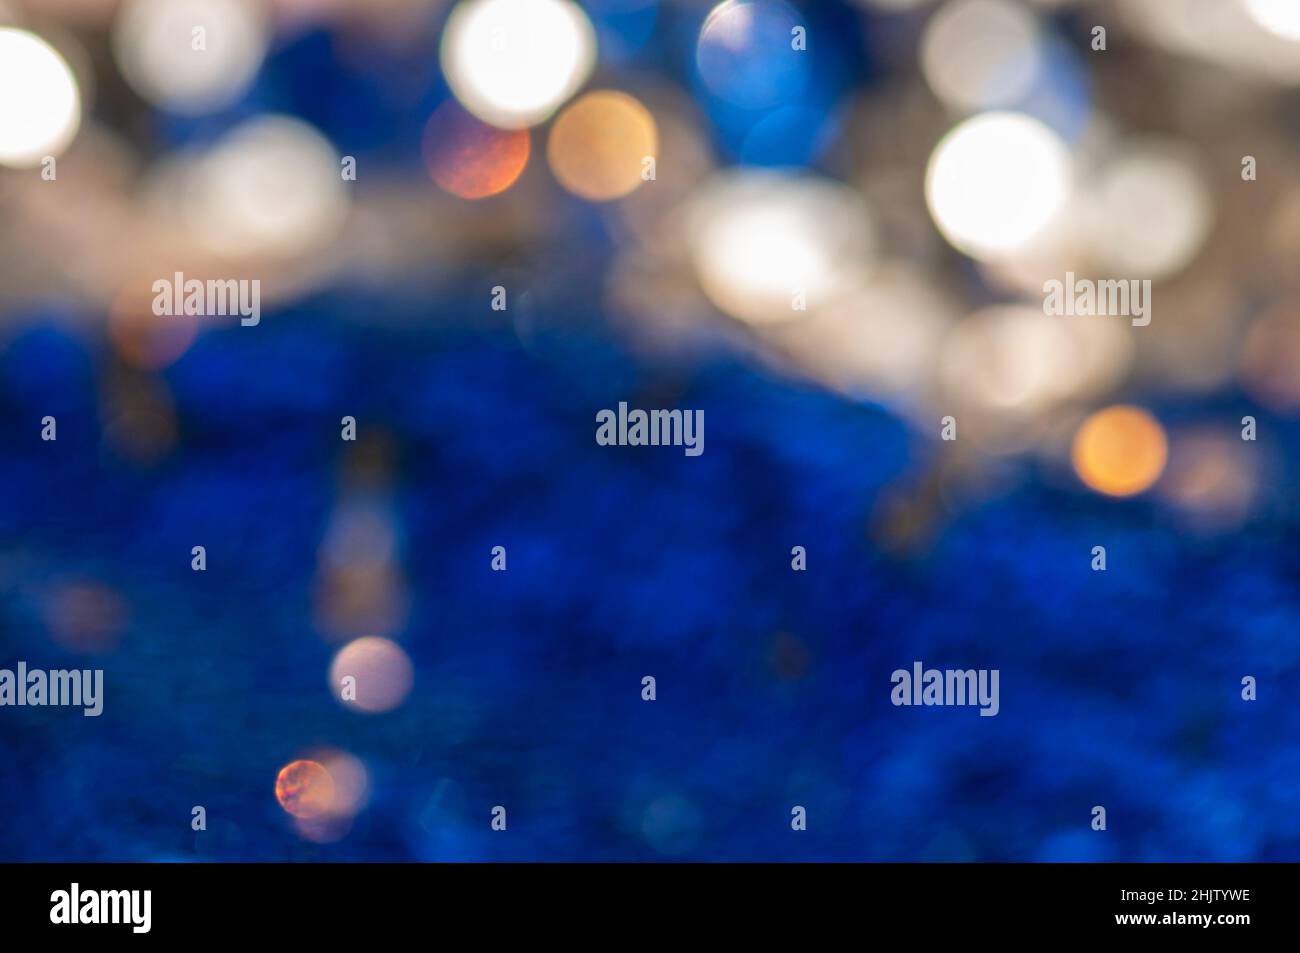 Blue defocused abstract bokeh lights background. Stock Photo